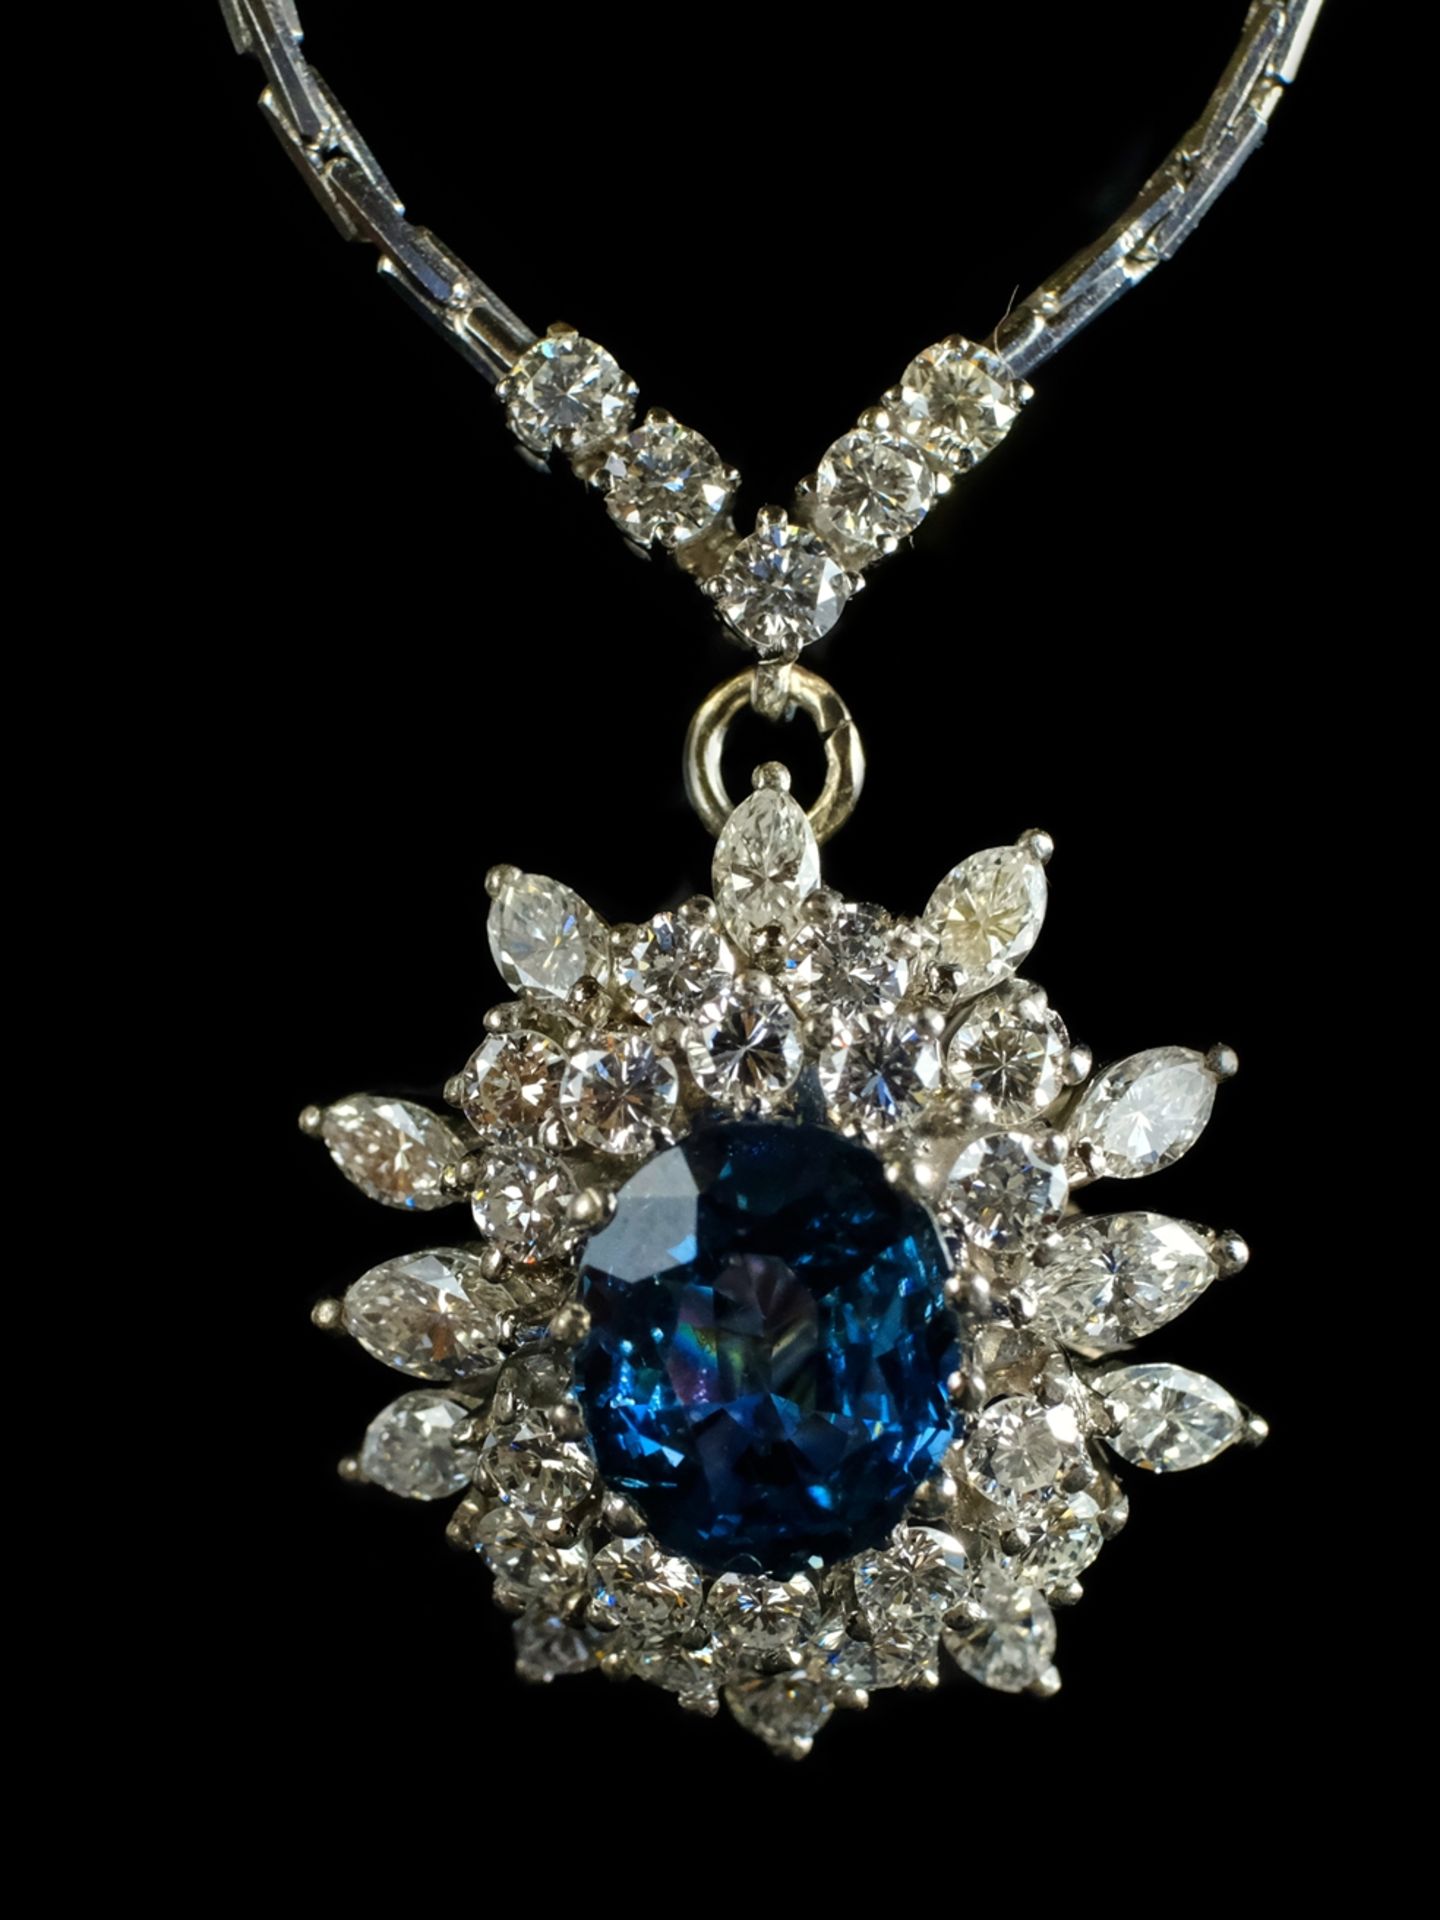 COLLIER with diamonds and sapphire, wonderful pendant in flower shape, sapphire with great radiance